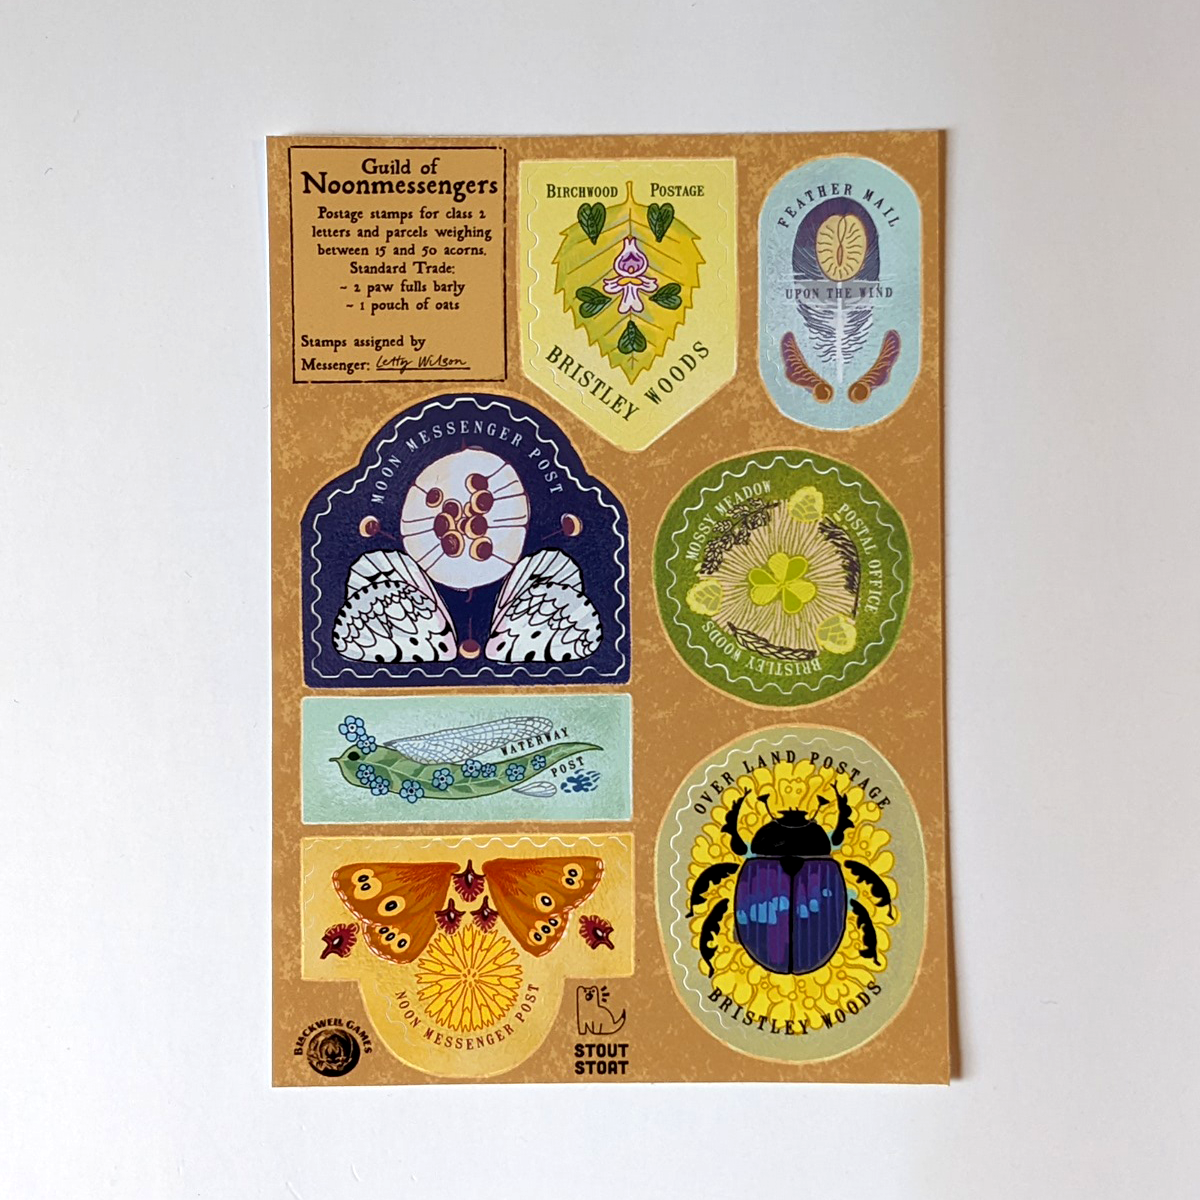 Photo. A sticker sheet from the Apawthecaria Deluxa bundle. There are 7 differently shaped stamps with die-cut franking around their edges, so that each stamp peels to look like a realistic stamp. The stamps feature natural elements, like moth wings and pressed flowers, as if they were made by animals for a beastly postal service.